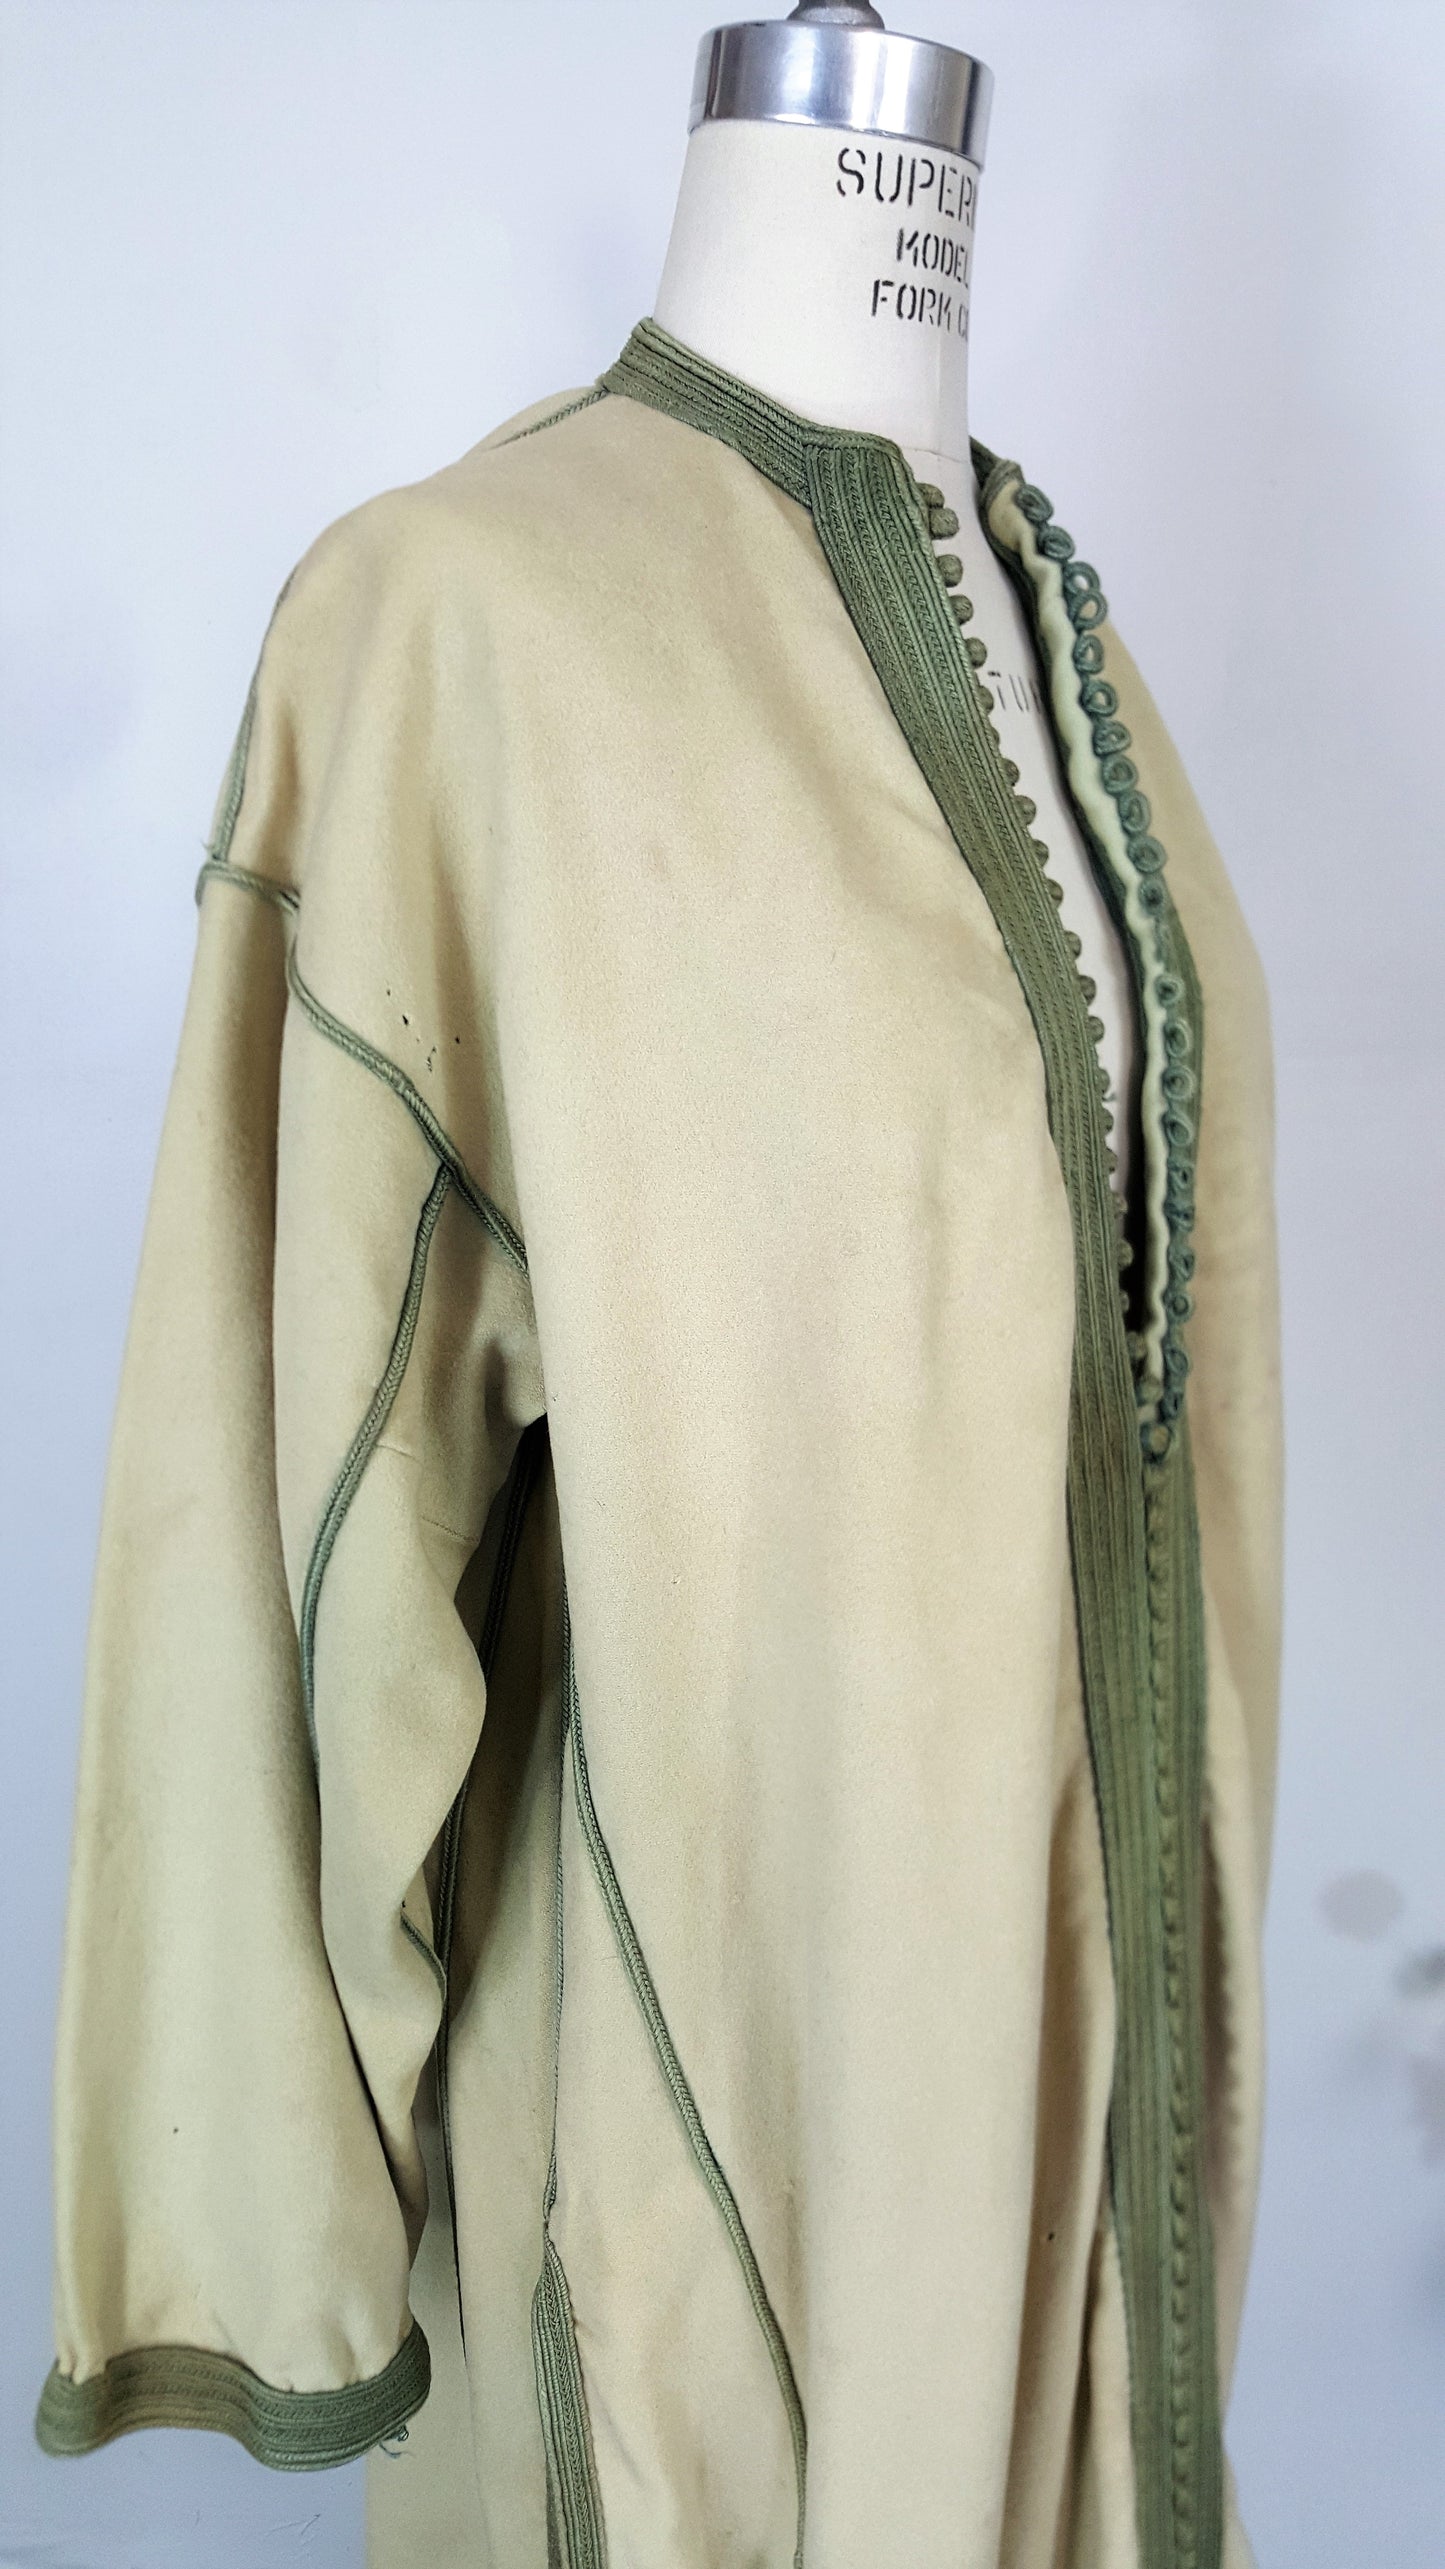 Vintage Hollywood Costume Long Wool Coat With Pockets In An Eastern Or Asian Style 